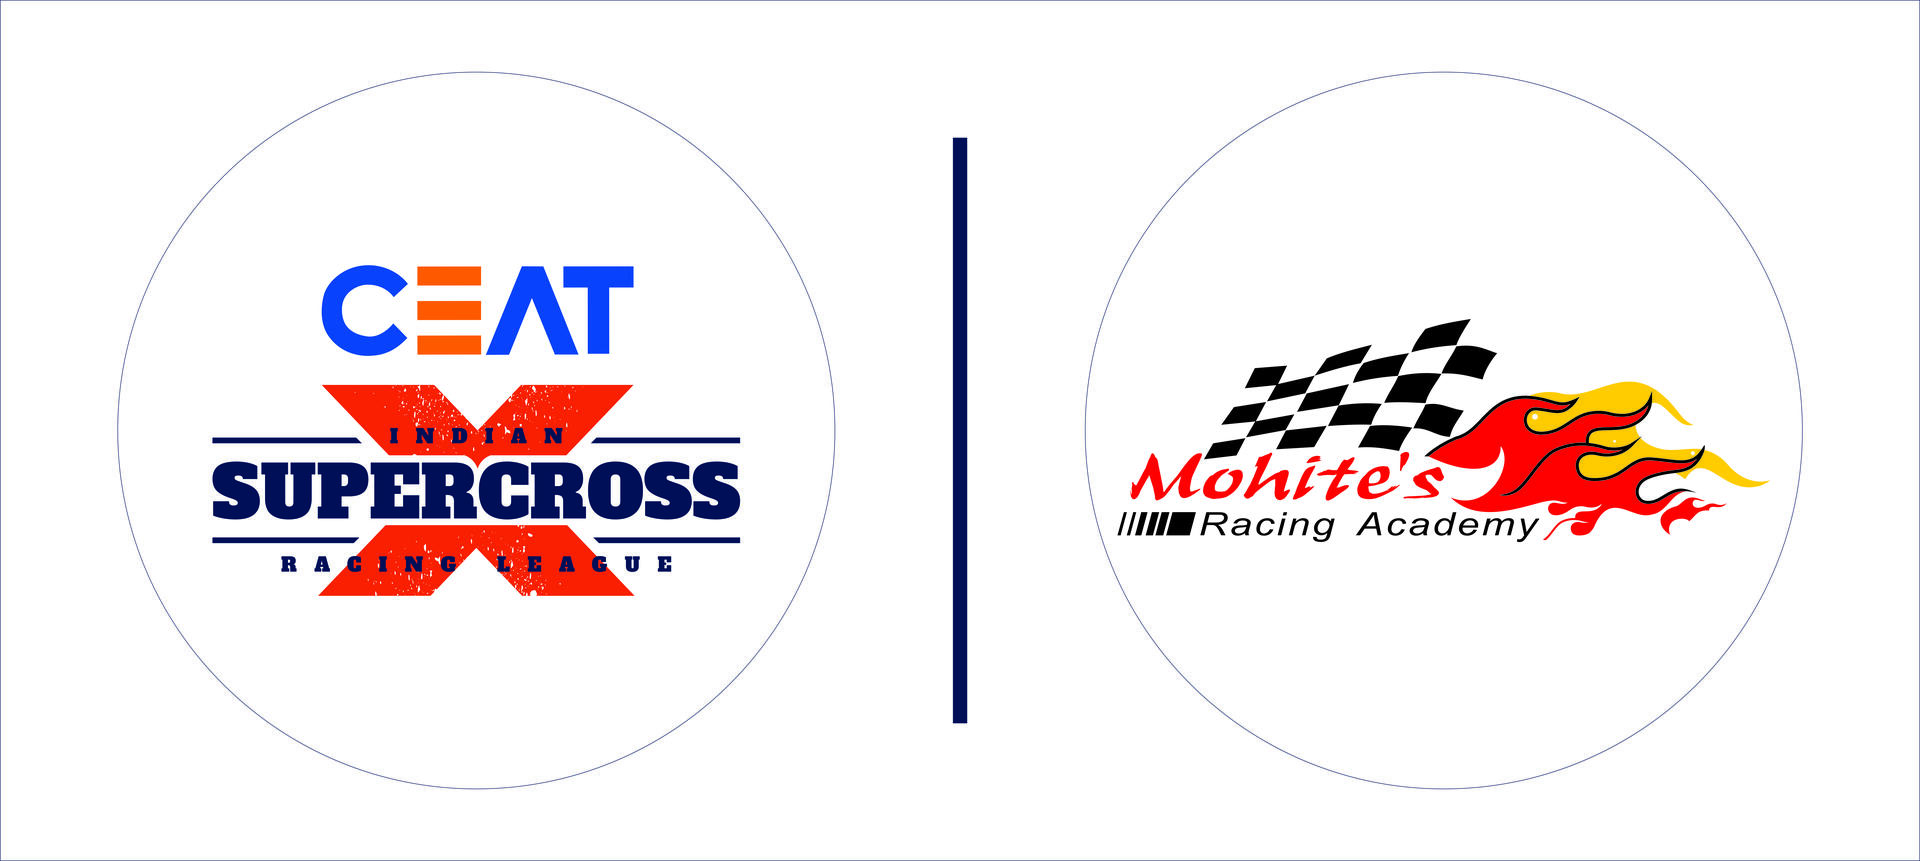 MOHITE RACING ACCELERATES INTO THE CEAT INDIAN SUPERCROSS RACING LEAGUE WITH THE ACQUISITION OF A FRANCHISE TEAM